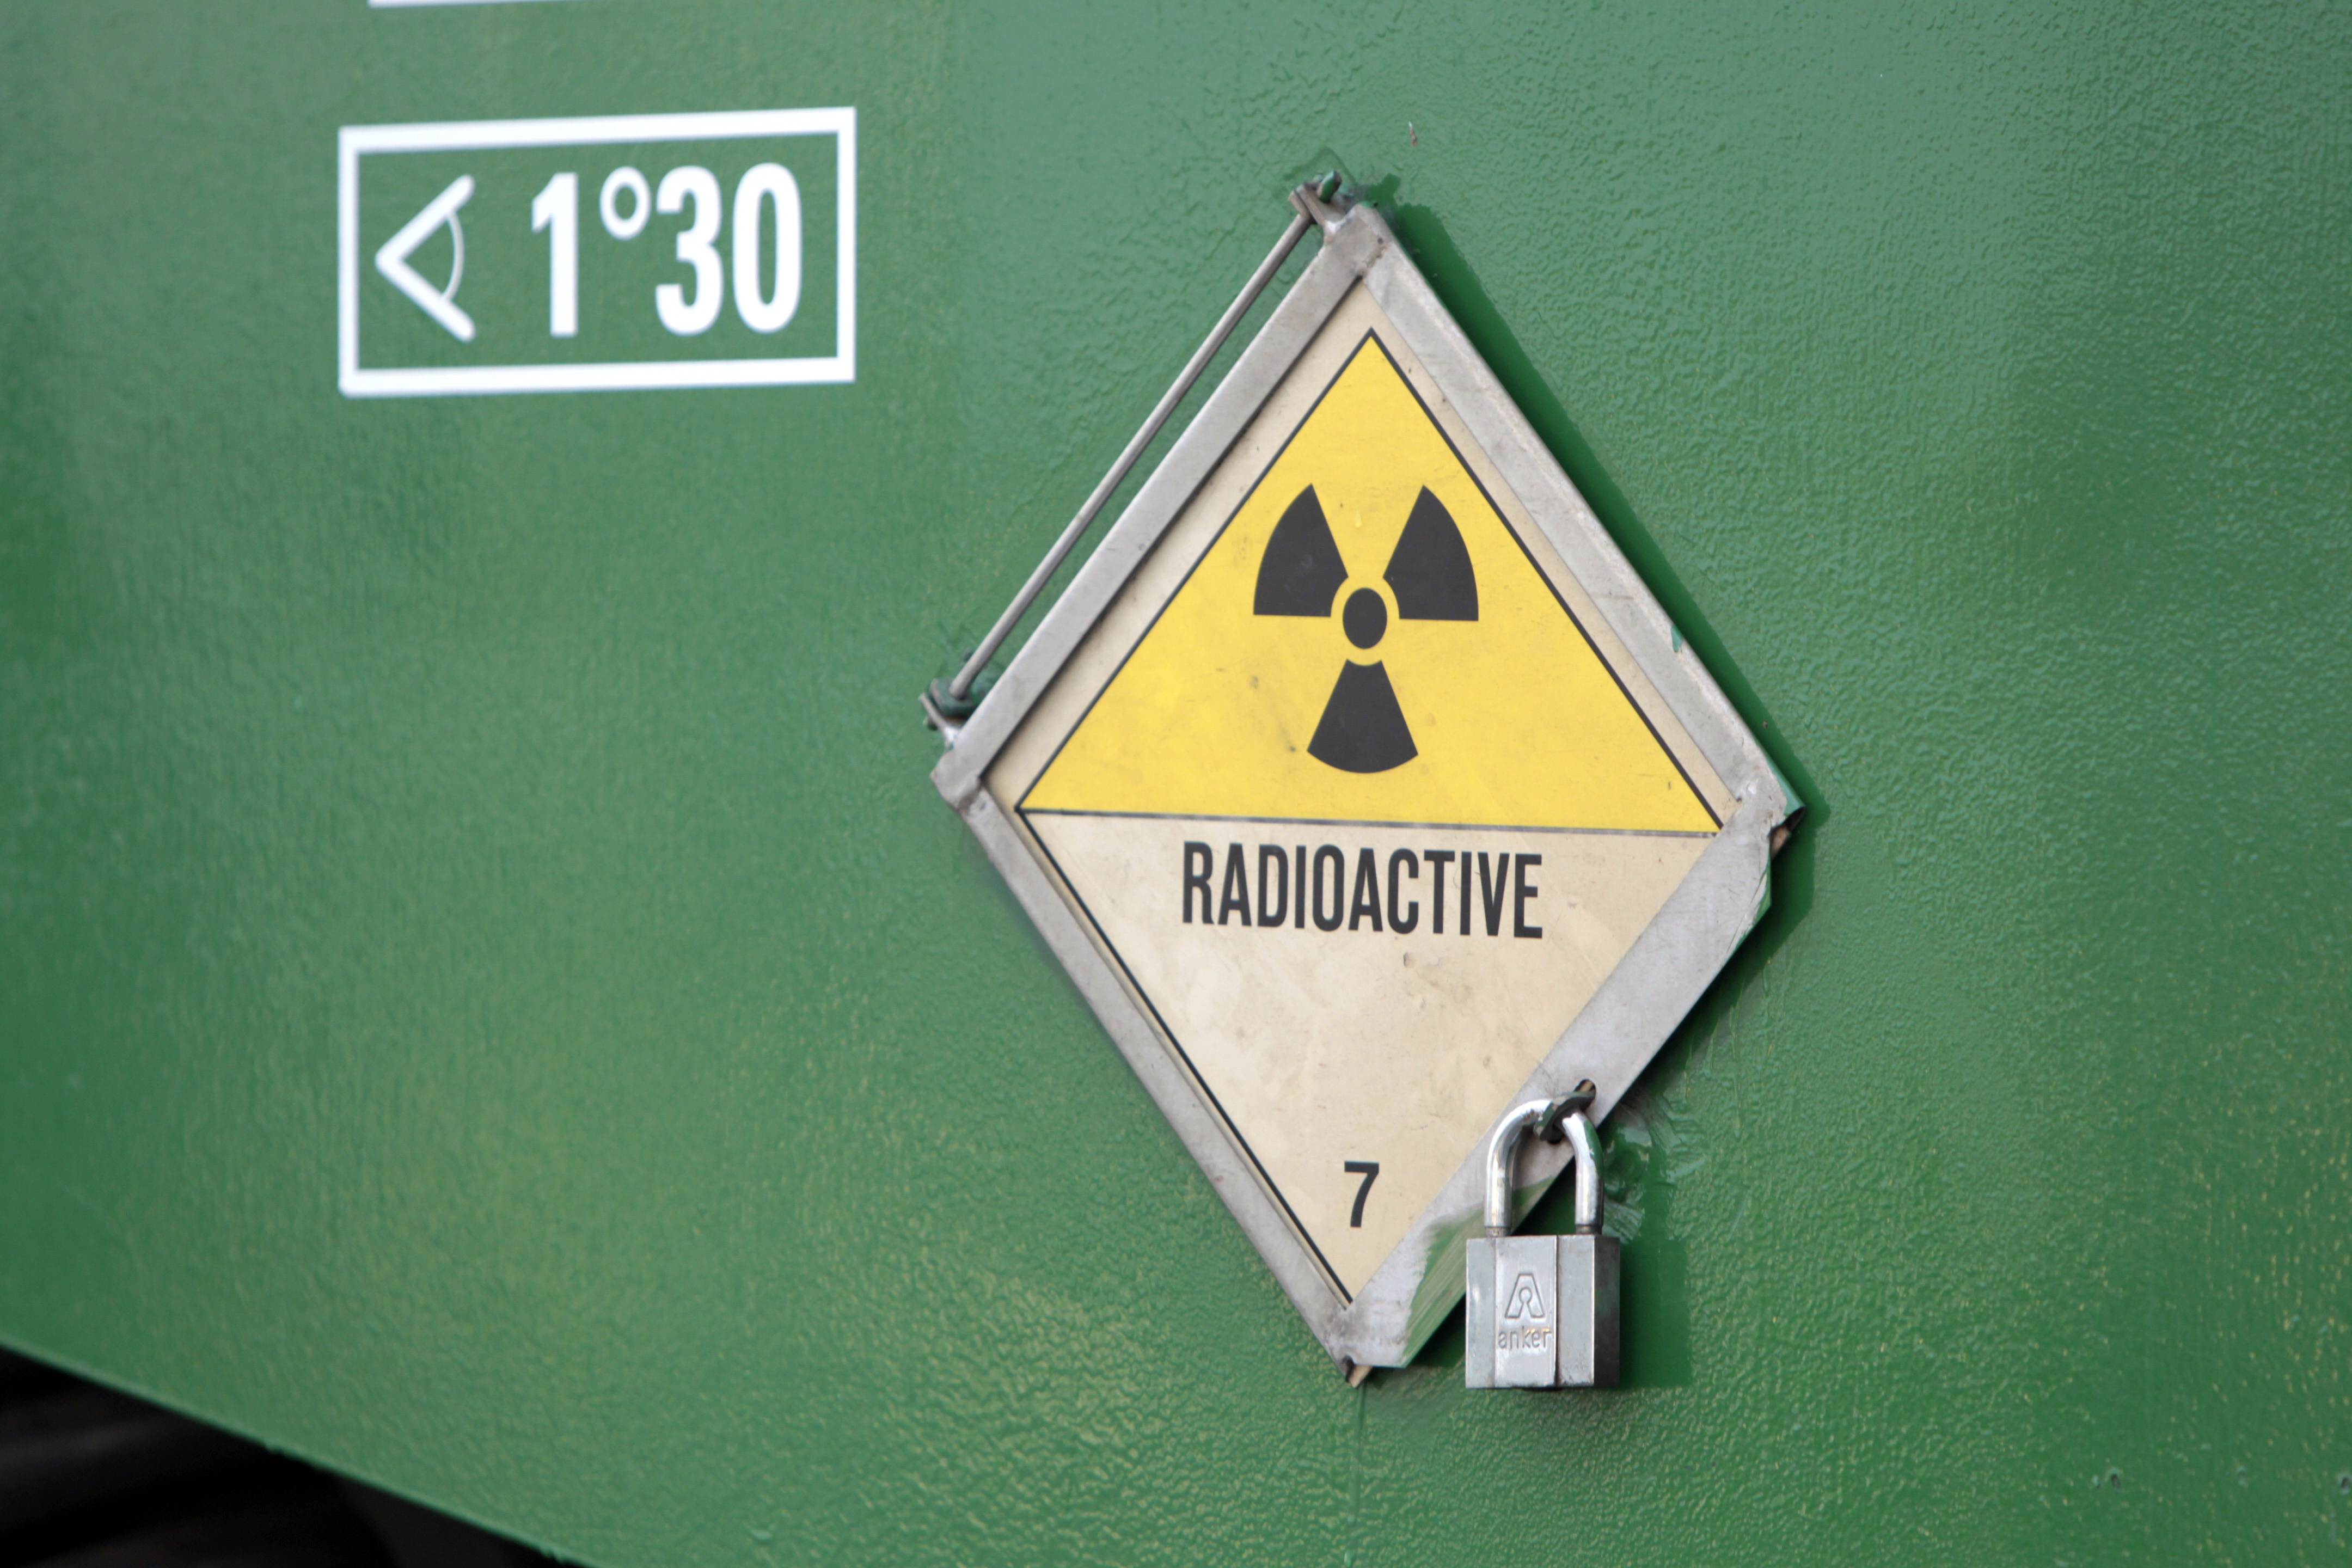 A radiation warning symbol on a nuclear waste container in Germany.  